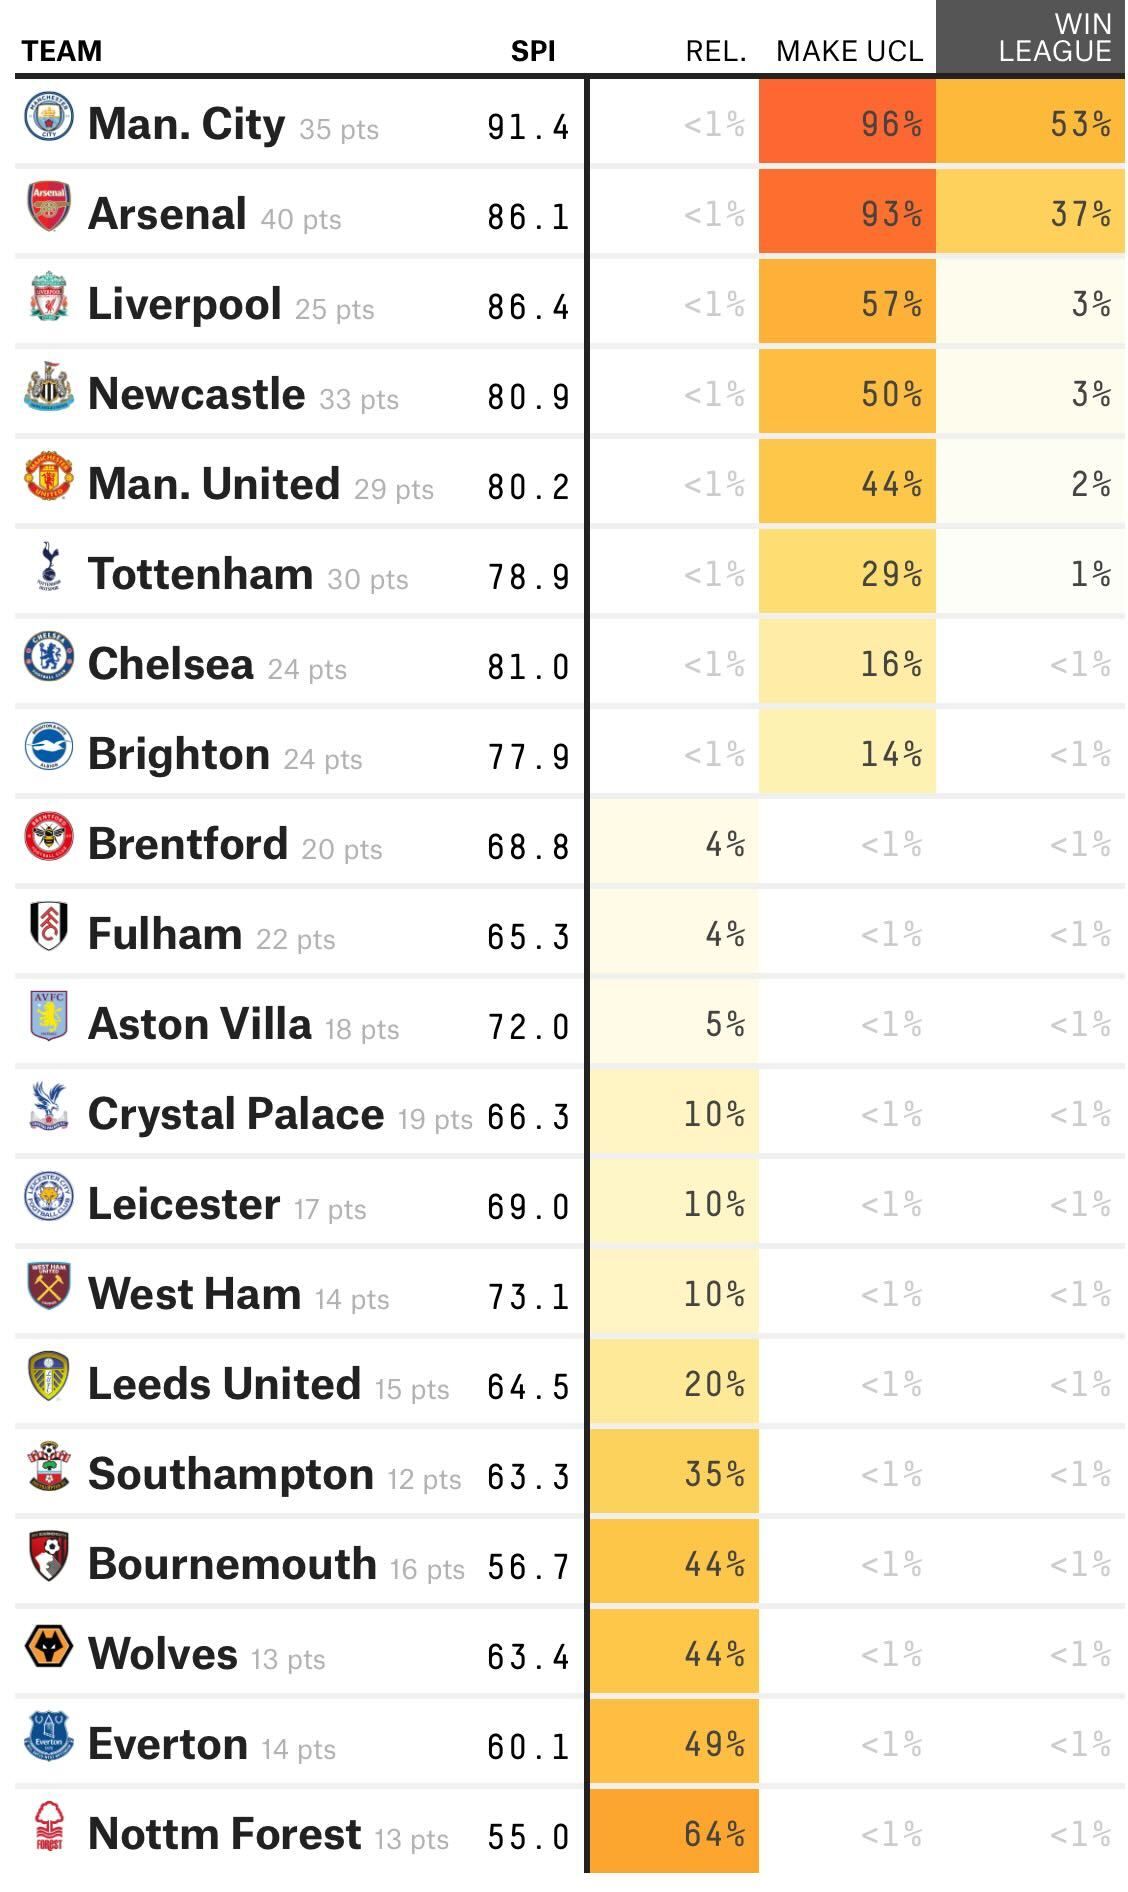 Full predicted Premier League table for 22/23